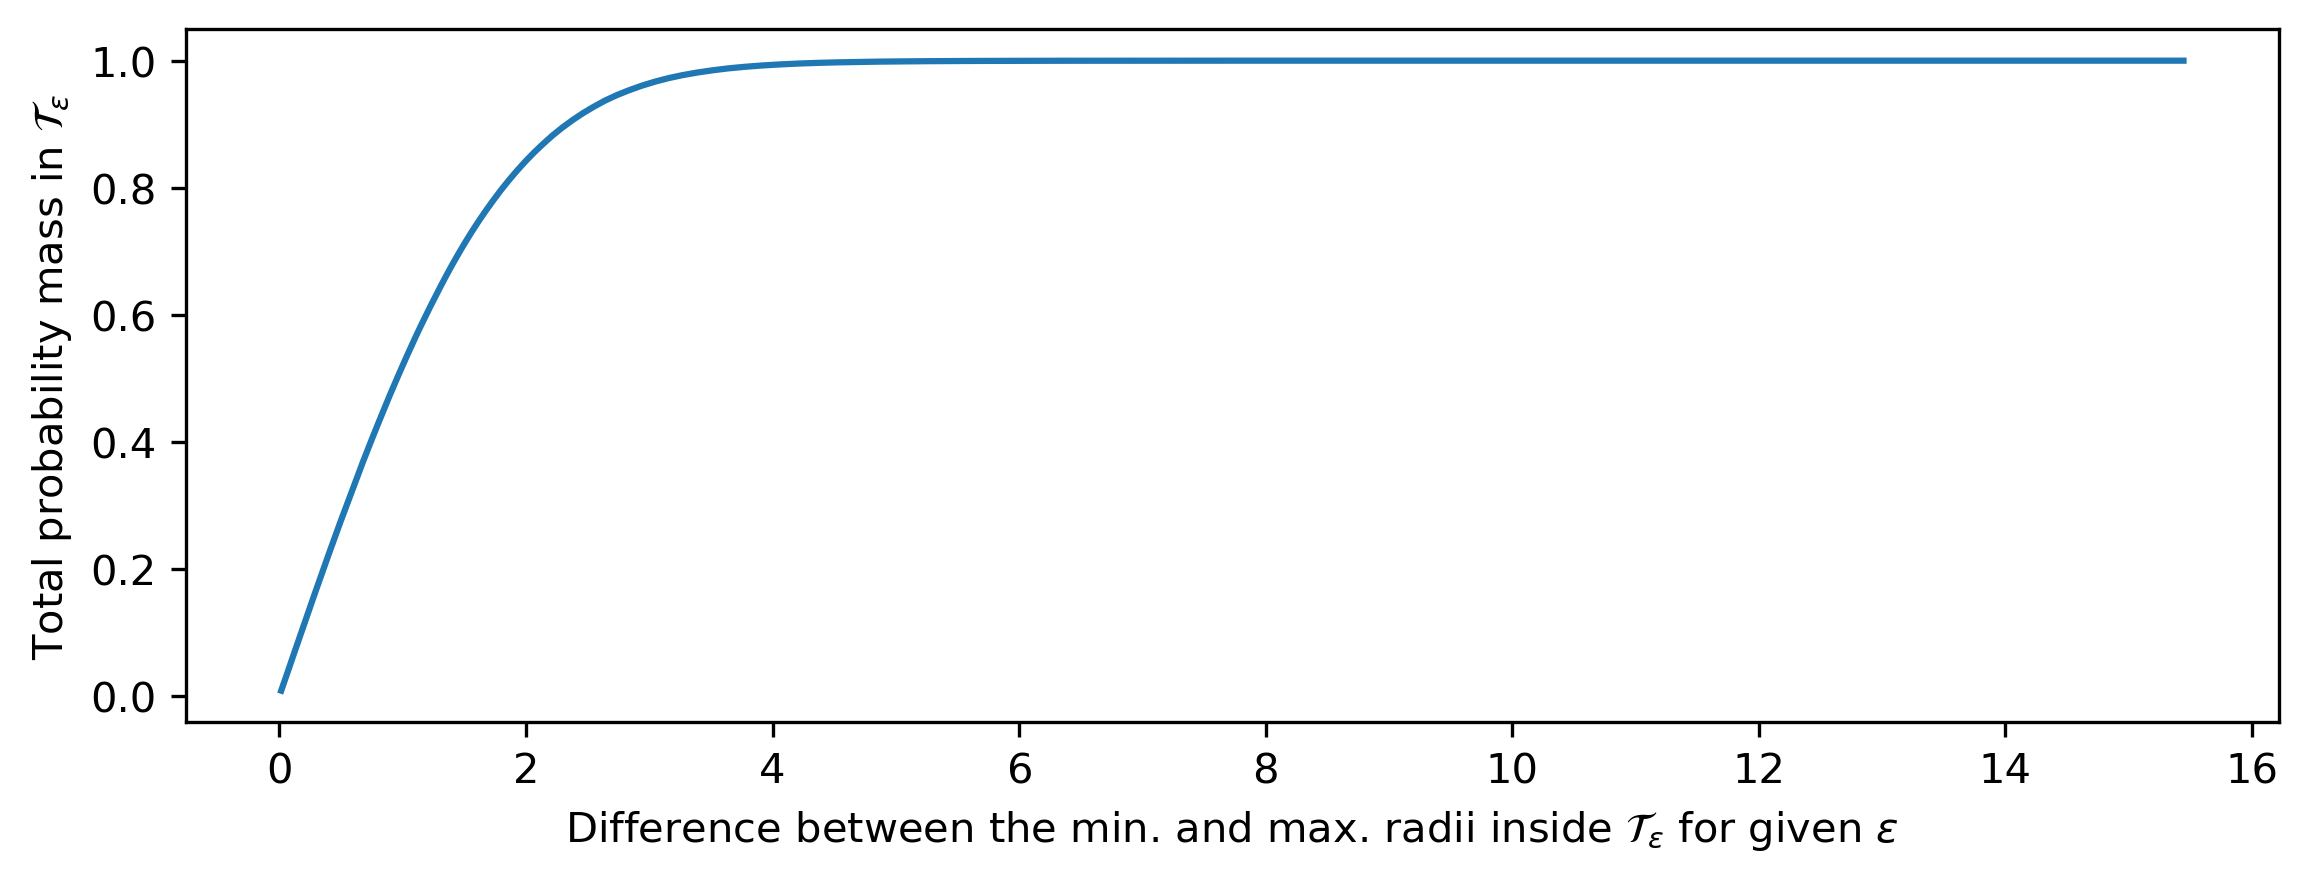 The total probability mass of a range of typical sets of a 100-dimensional standard Gaussian distribution, with their size measured by the difference between the minimal and maximal radii within the set (i.e. the width of the Gaussian annulus). An annulus with width 4 already contains most of the probability mass.